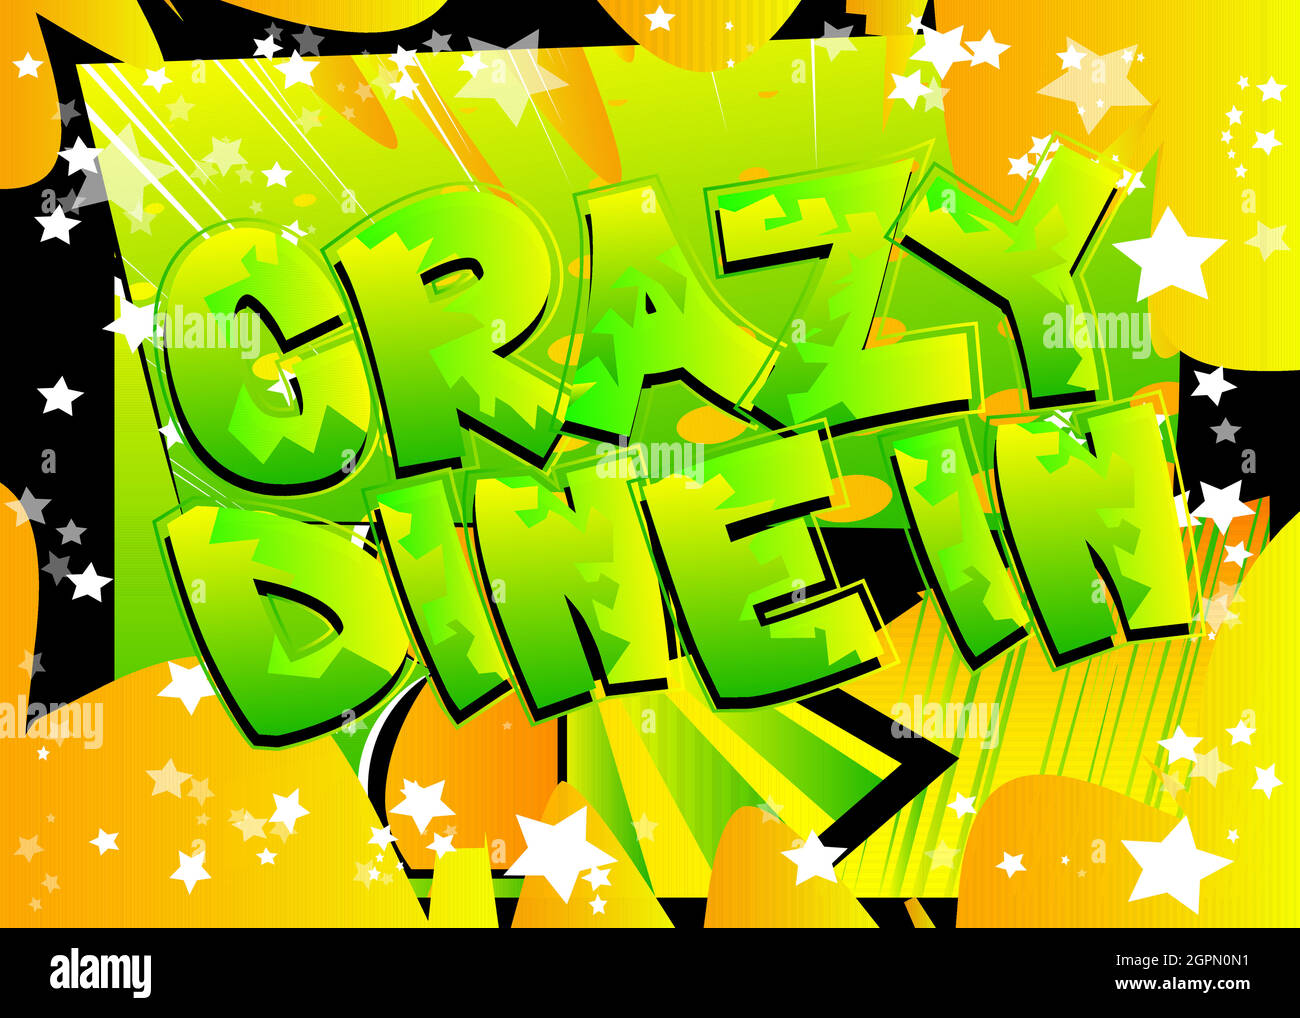 Crazy Dine In  - Comic book style text. Stock Vector